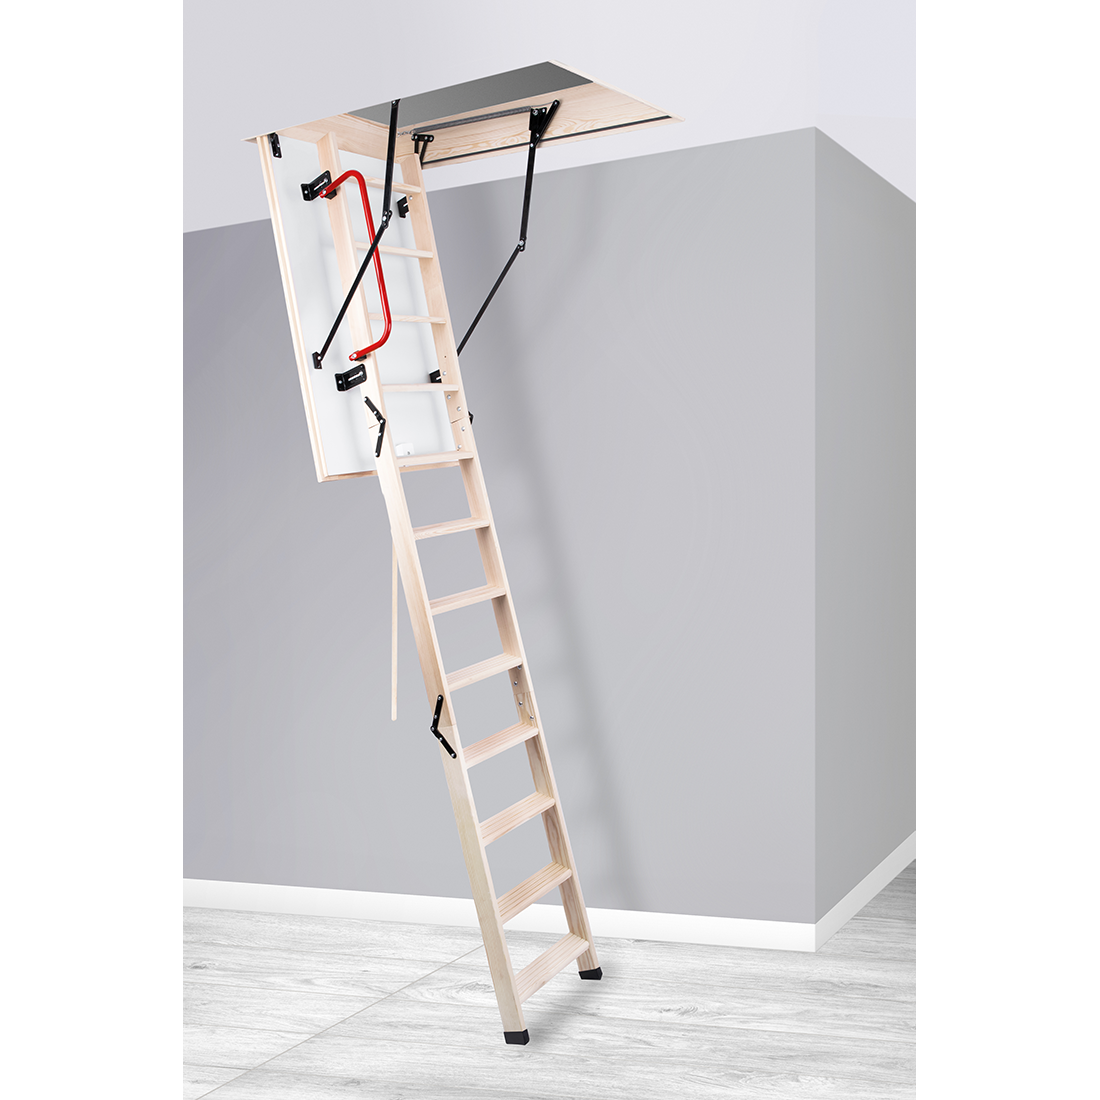 Wooden Attic Ladder 47 x 23.5 with handrail